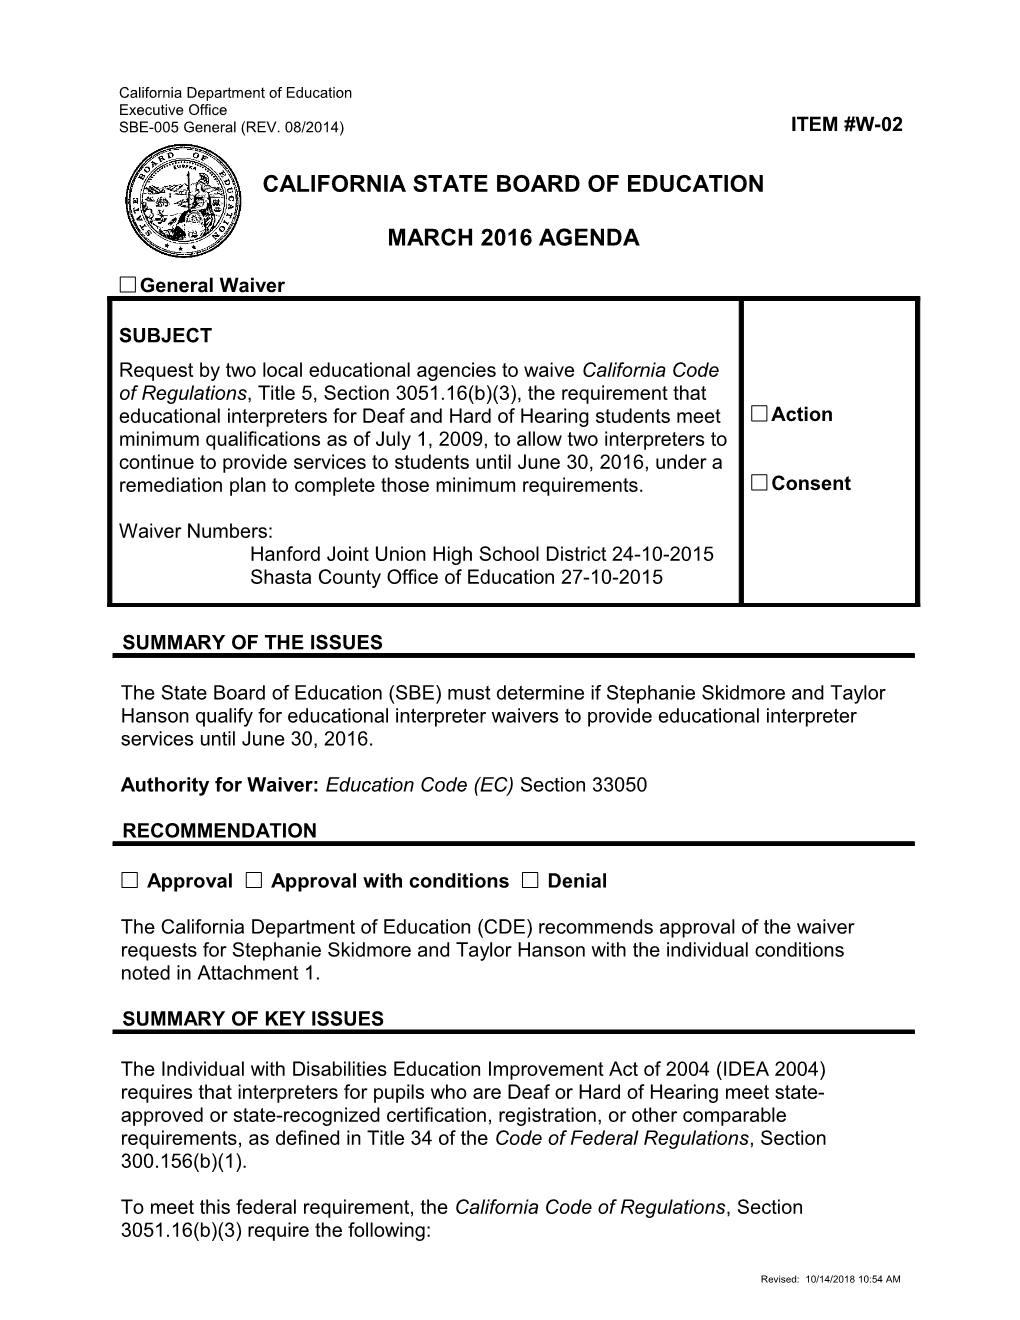 March 2016 Waiver Item W-02 - Meeting Agendas (CA State Board of Education)